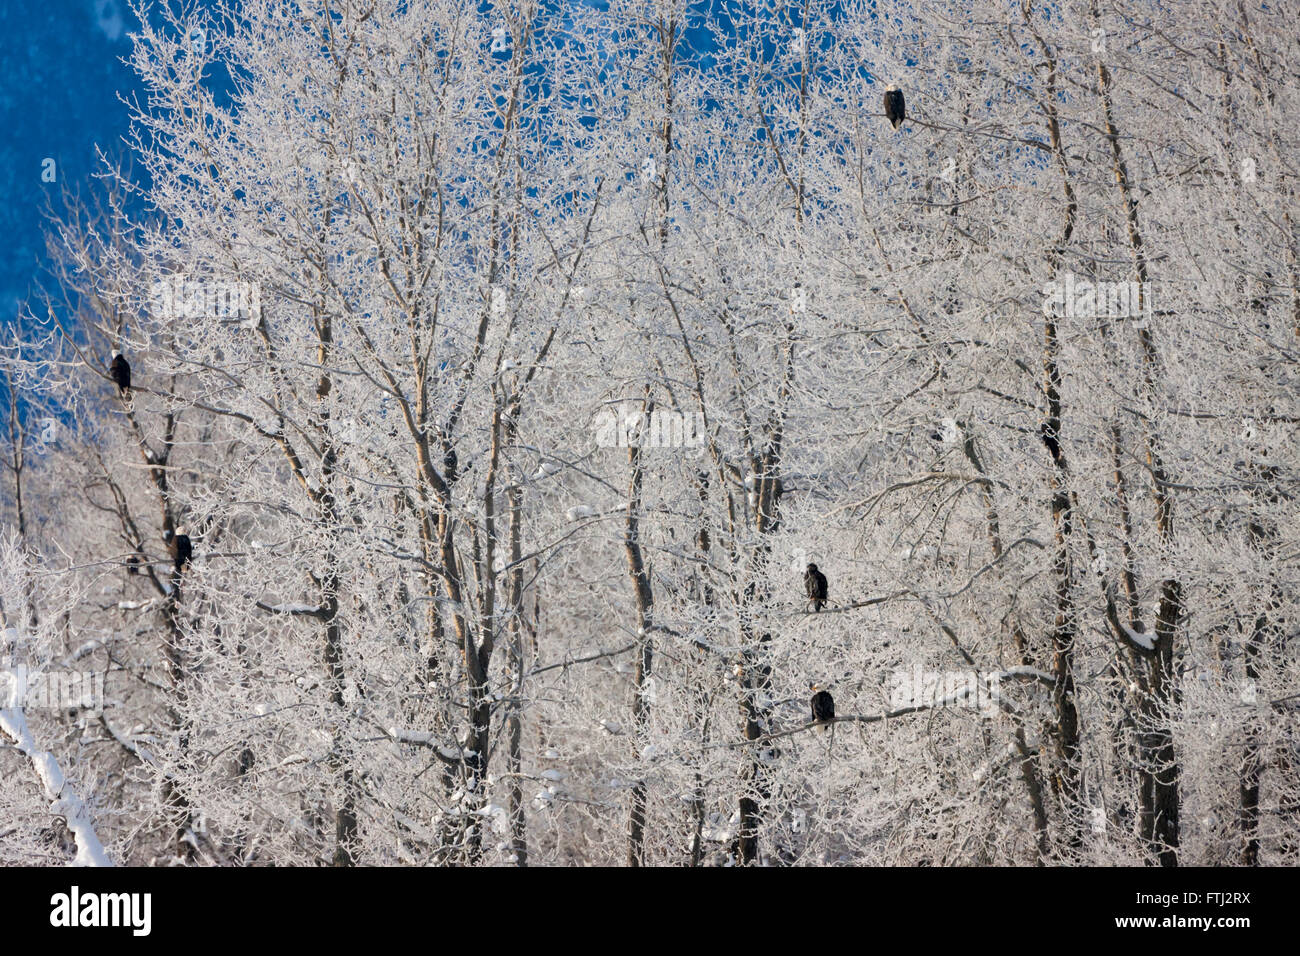 Bald Eagles in the forest covered with snow, Haines, Alaska, USA Stock Photo